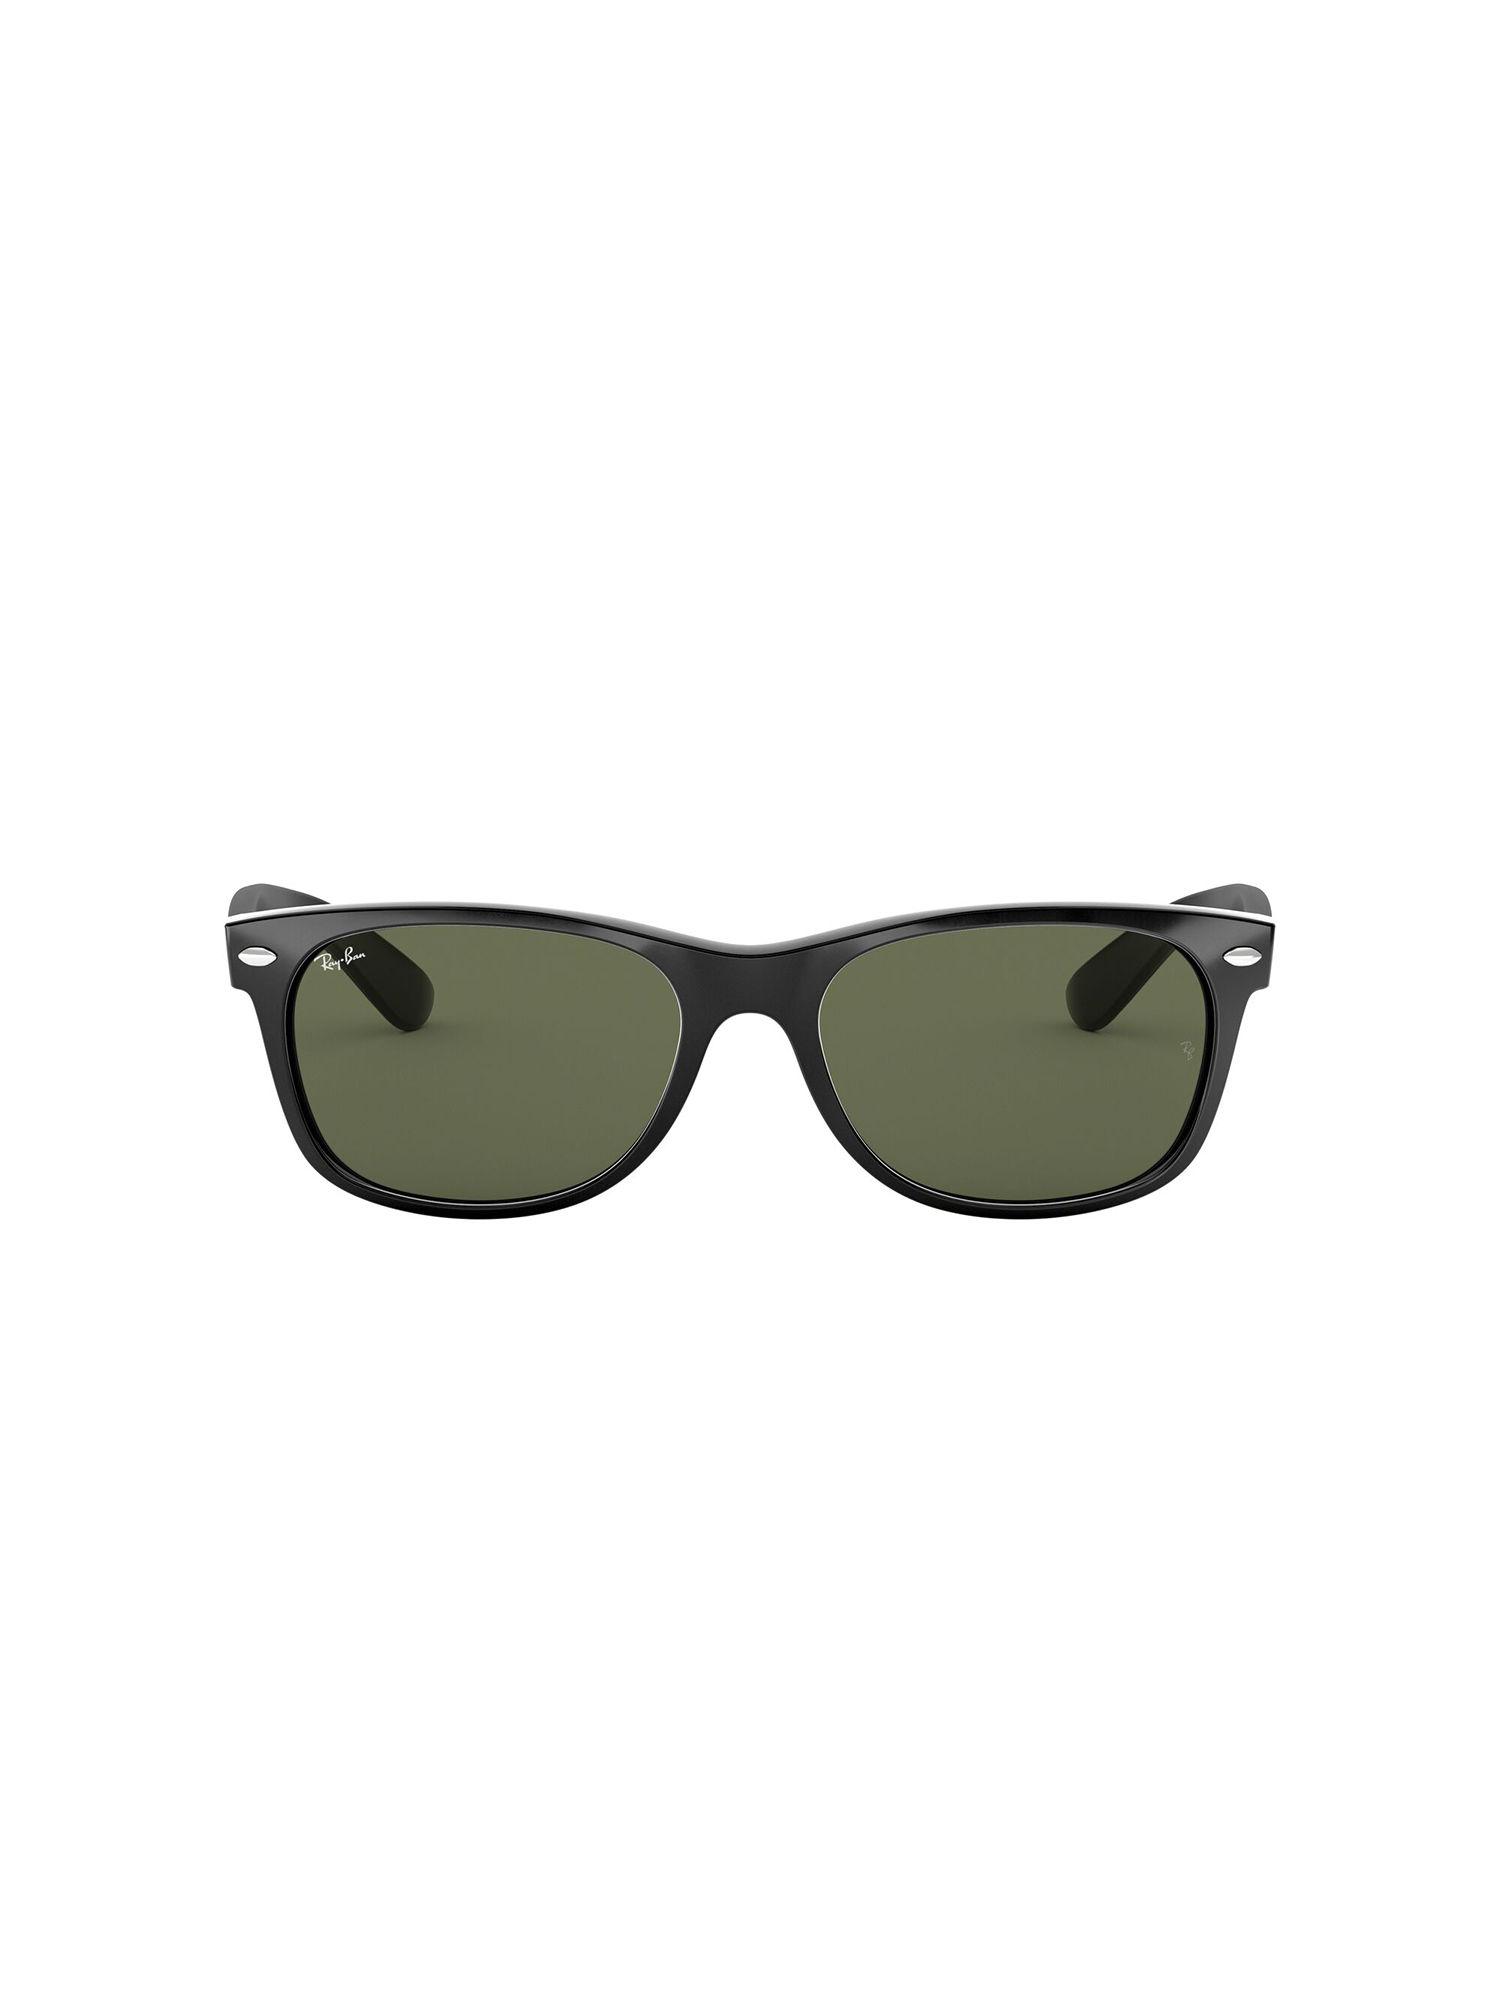 0rb2132-mint-green-icons-square-sunglasses---52-mm